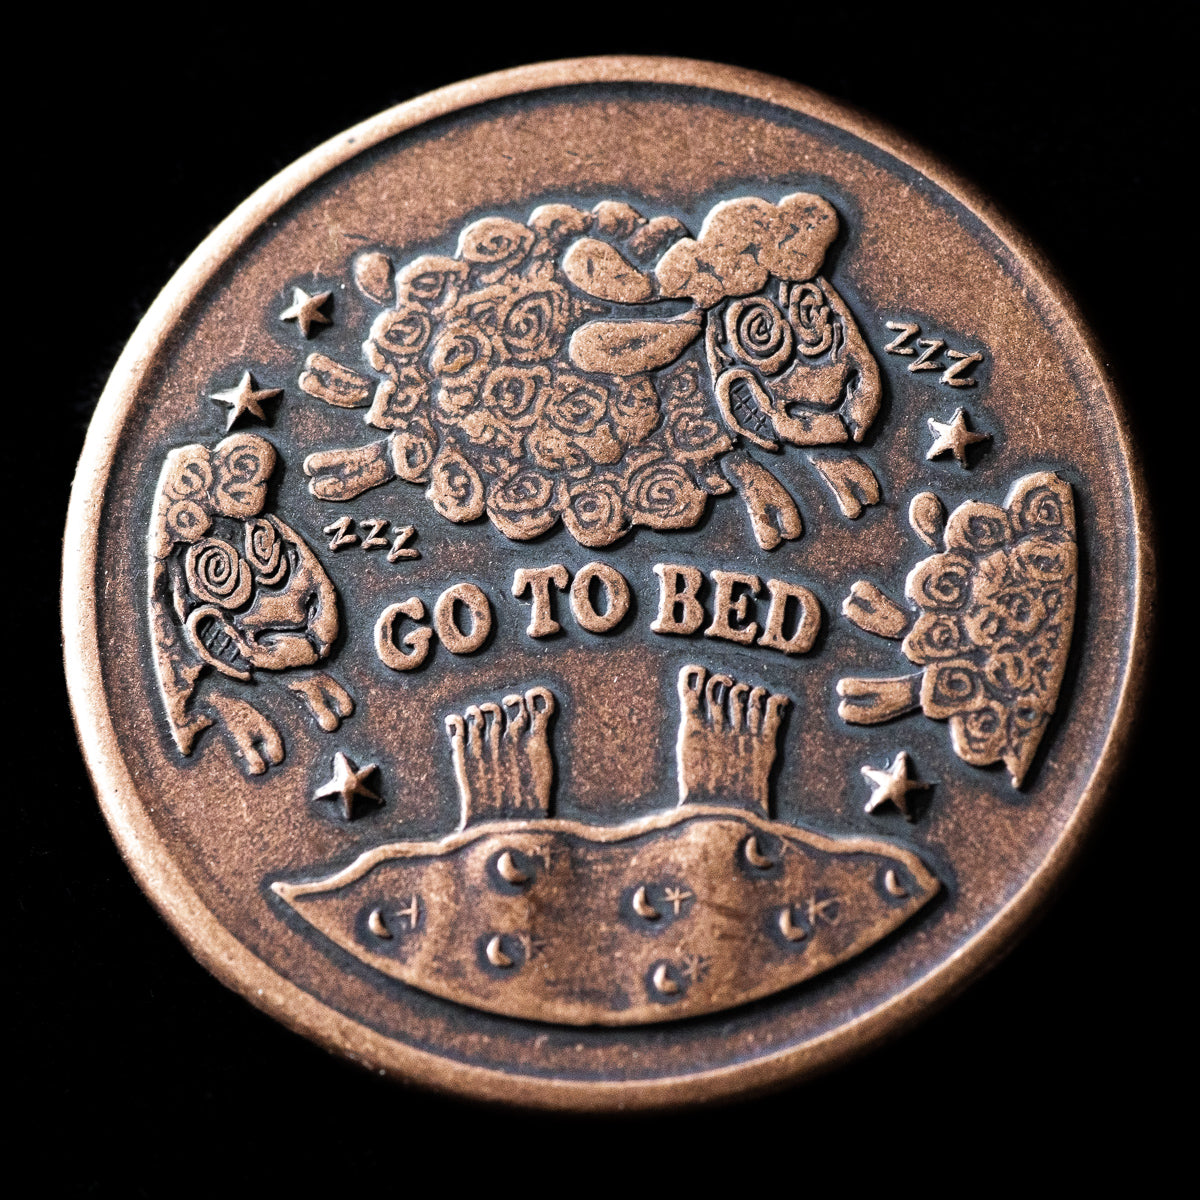 One More Episode / Go to Bed Decision Maker Coin